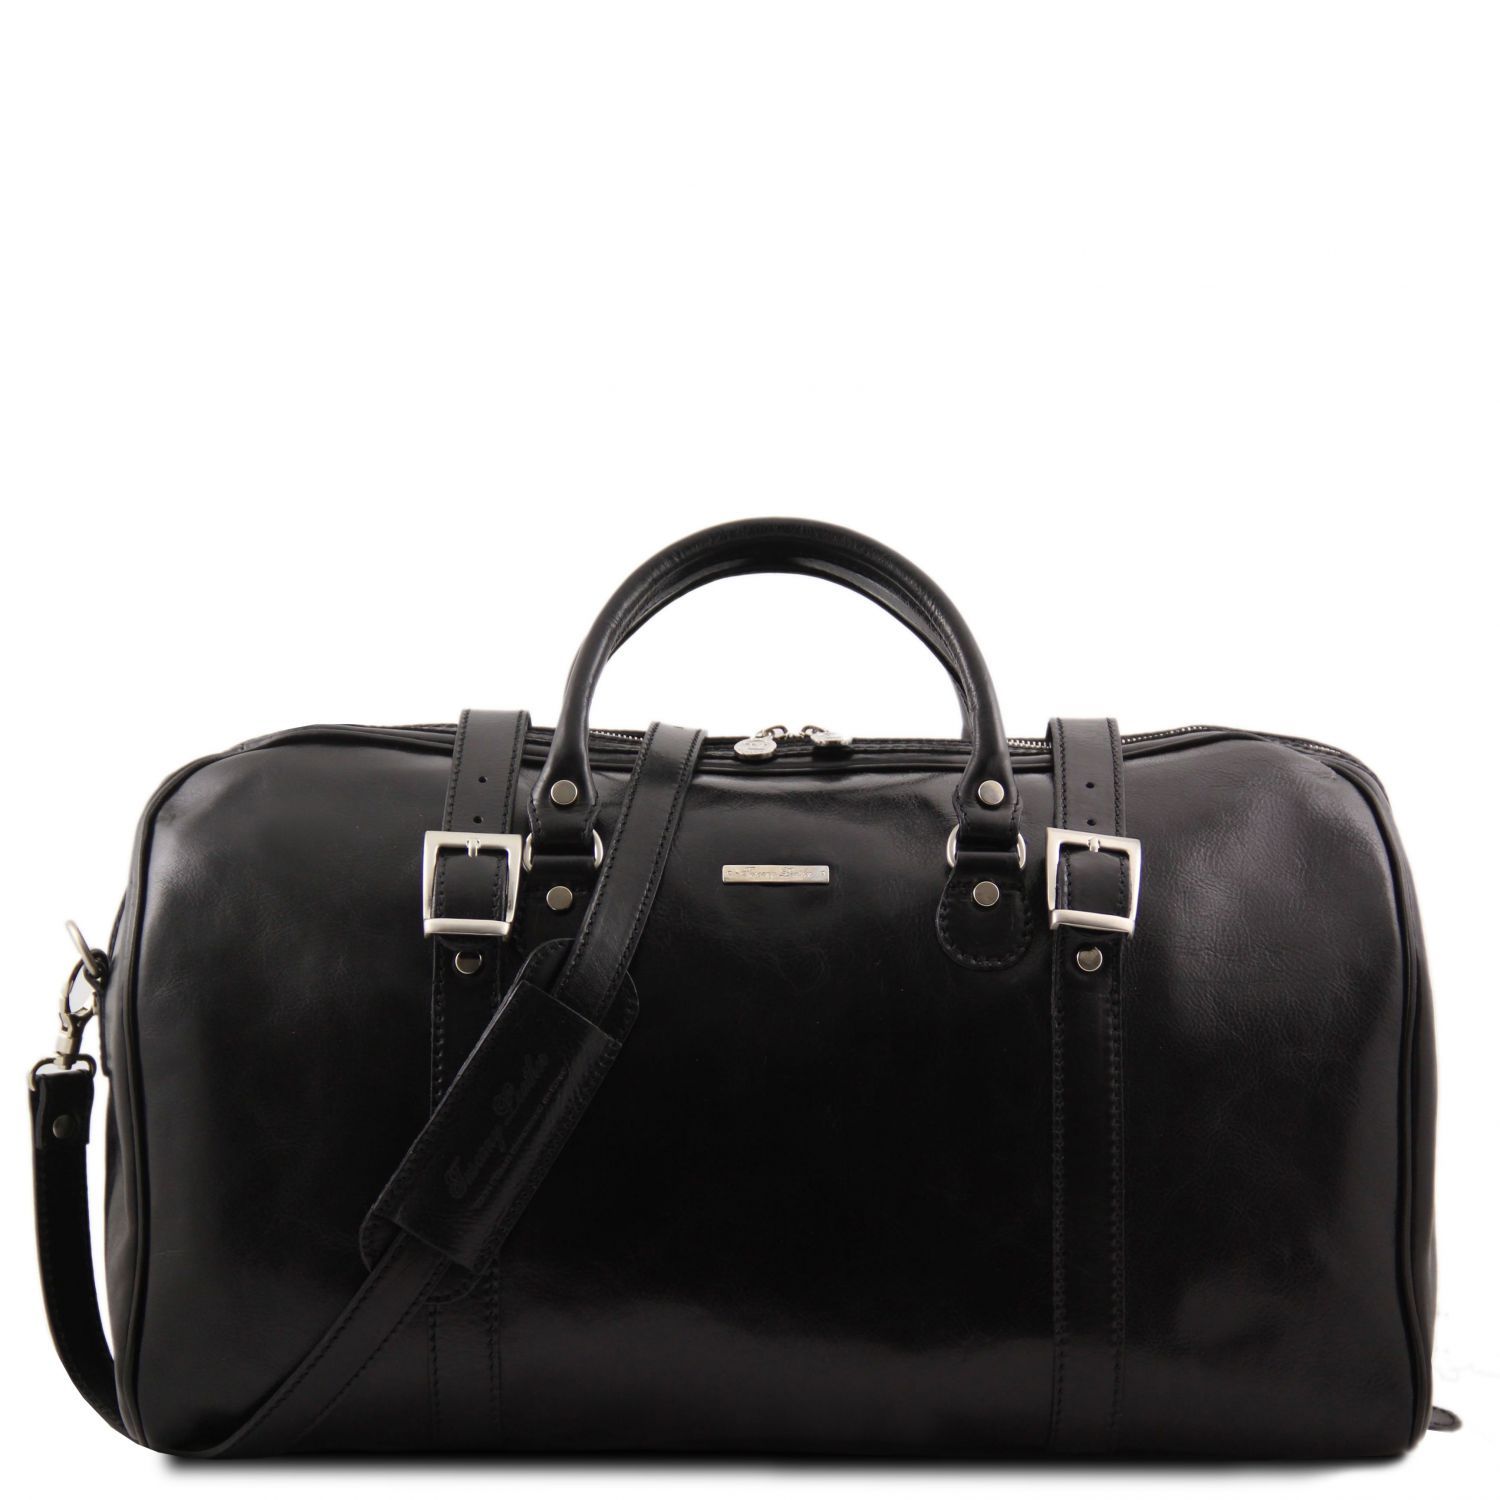 Berlin Travel Leather Duffle bag With Front Straps Large Size Black TL1013